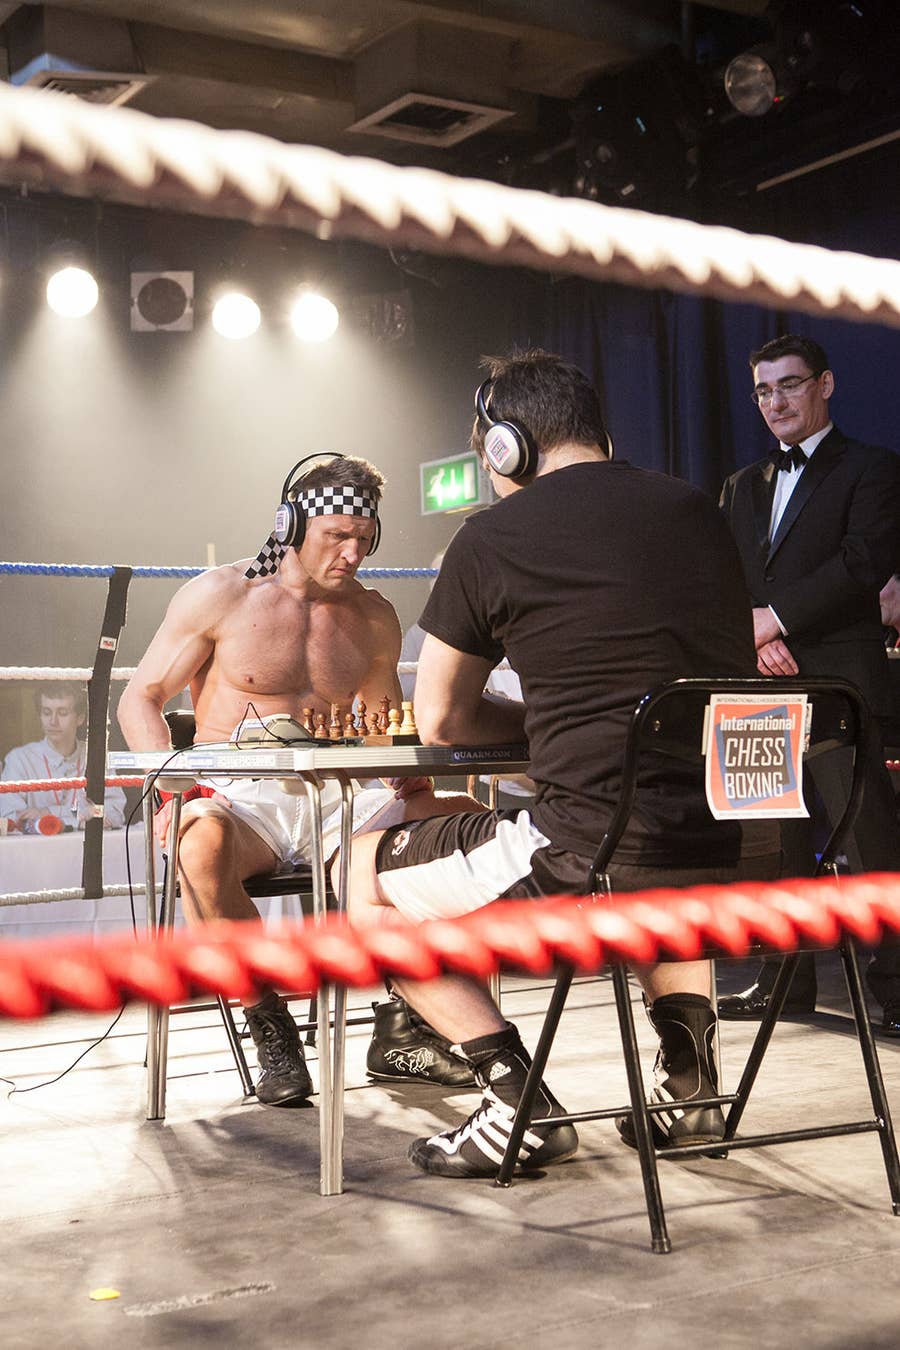 Chess Boxing – Who knew!